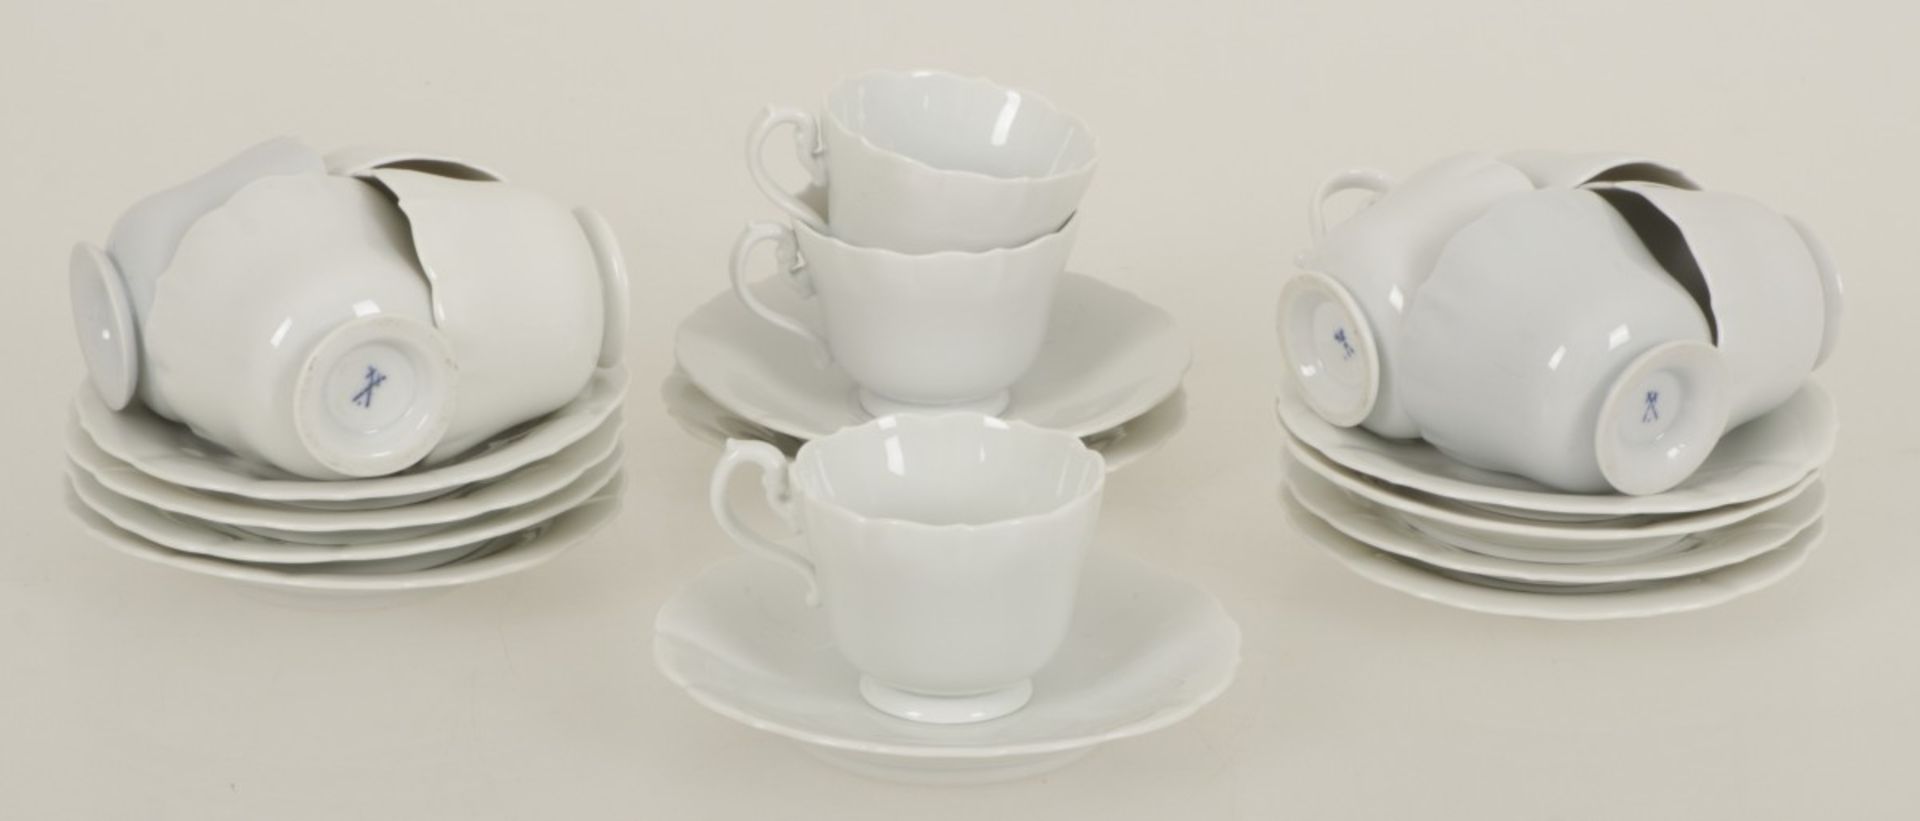 A set of (11) porcelain cups and saucers. Meissen, 1st half 20th century.